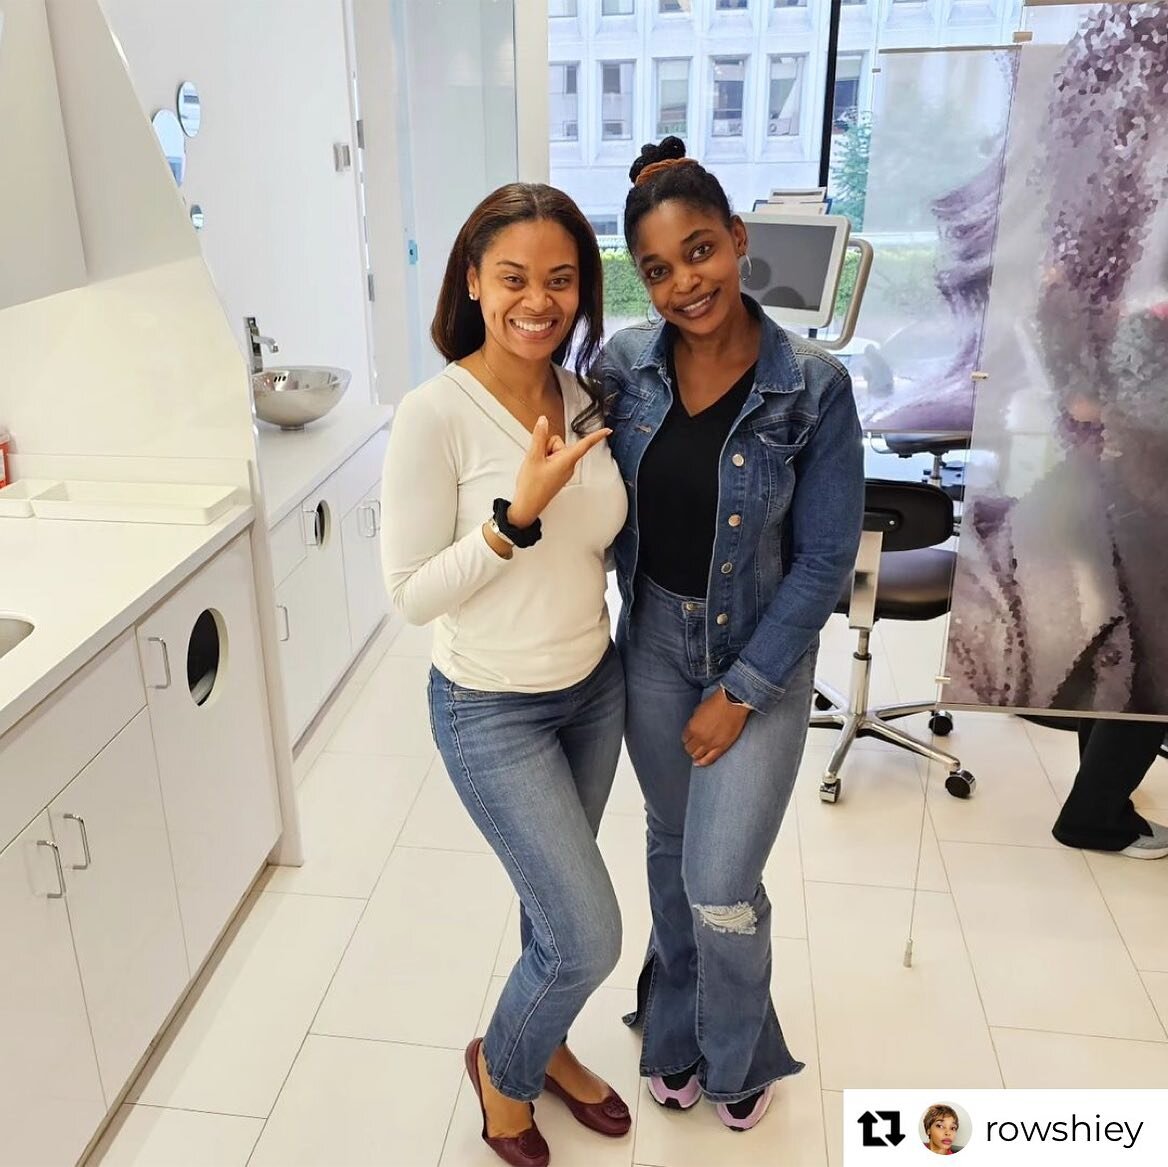 Repost from our awesome patient @rowshiey
&bull;
My smile was perfected by none other than @infinityortho and her team!
Those two years went by fast. Thank you, Dr. Patrice and your team for perfecting my smile.
#orthodontics #washingtondc  #braces #